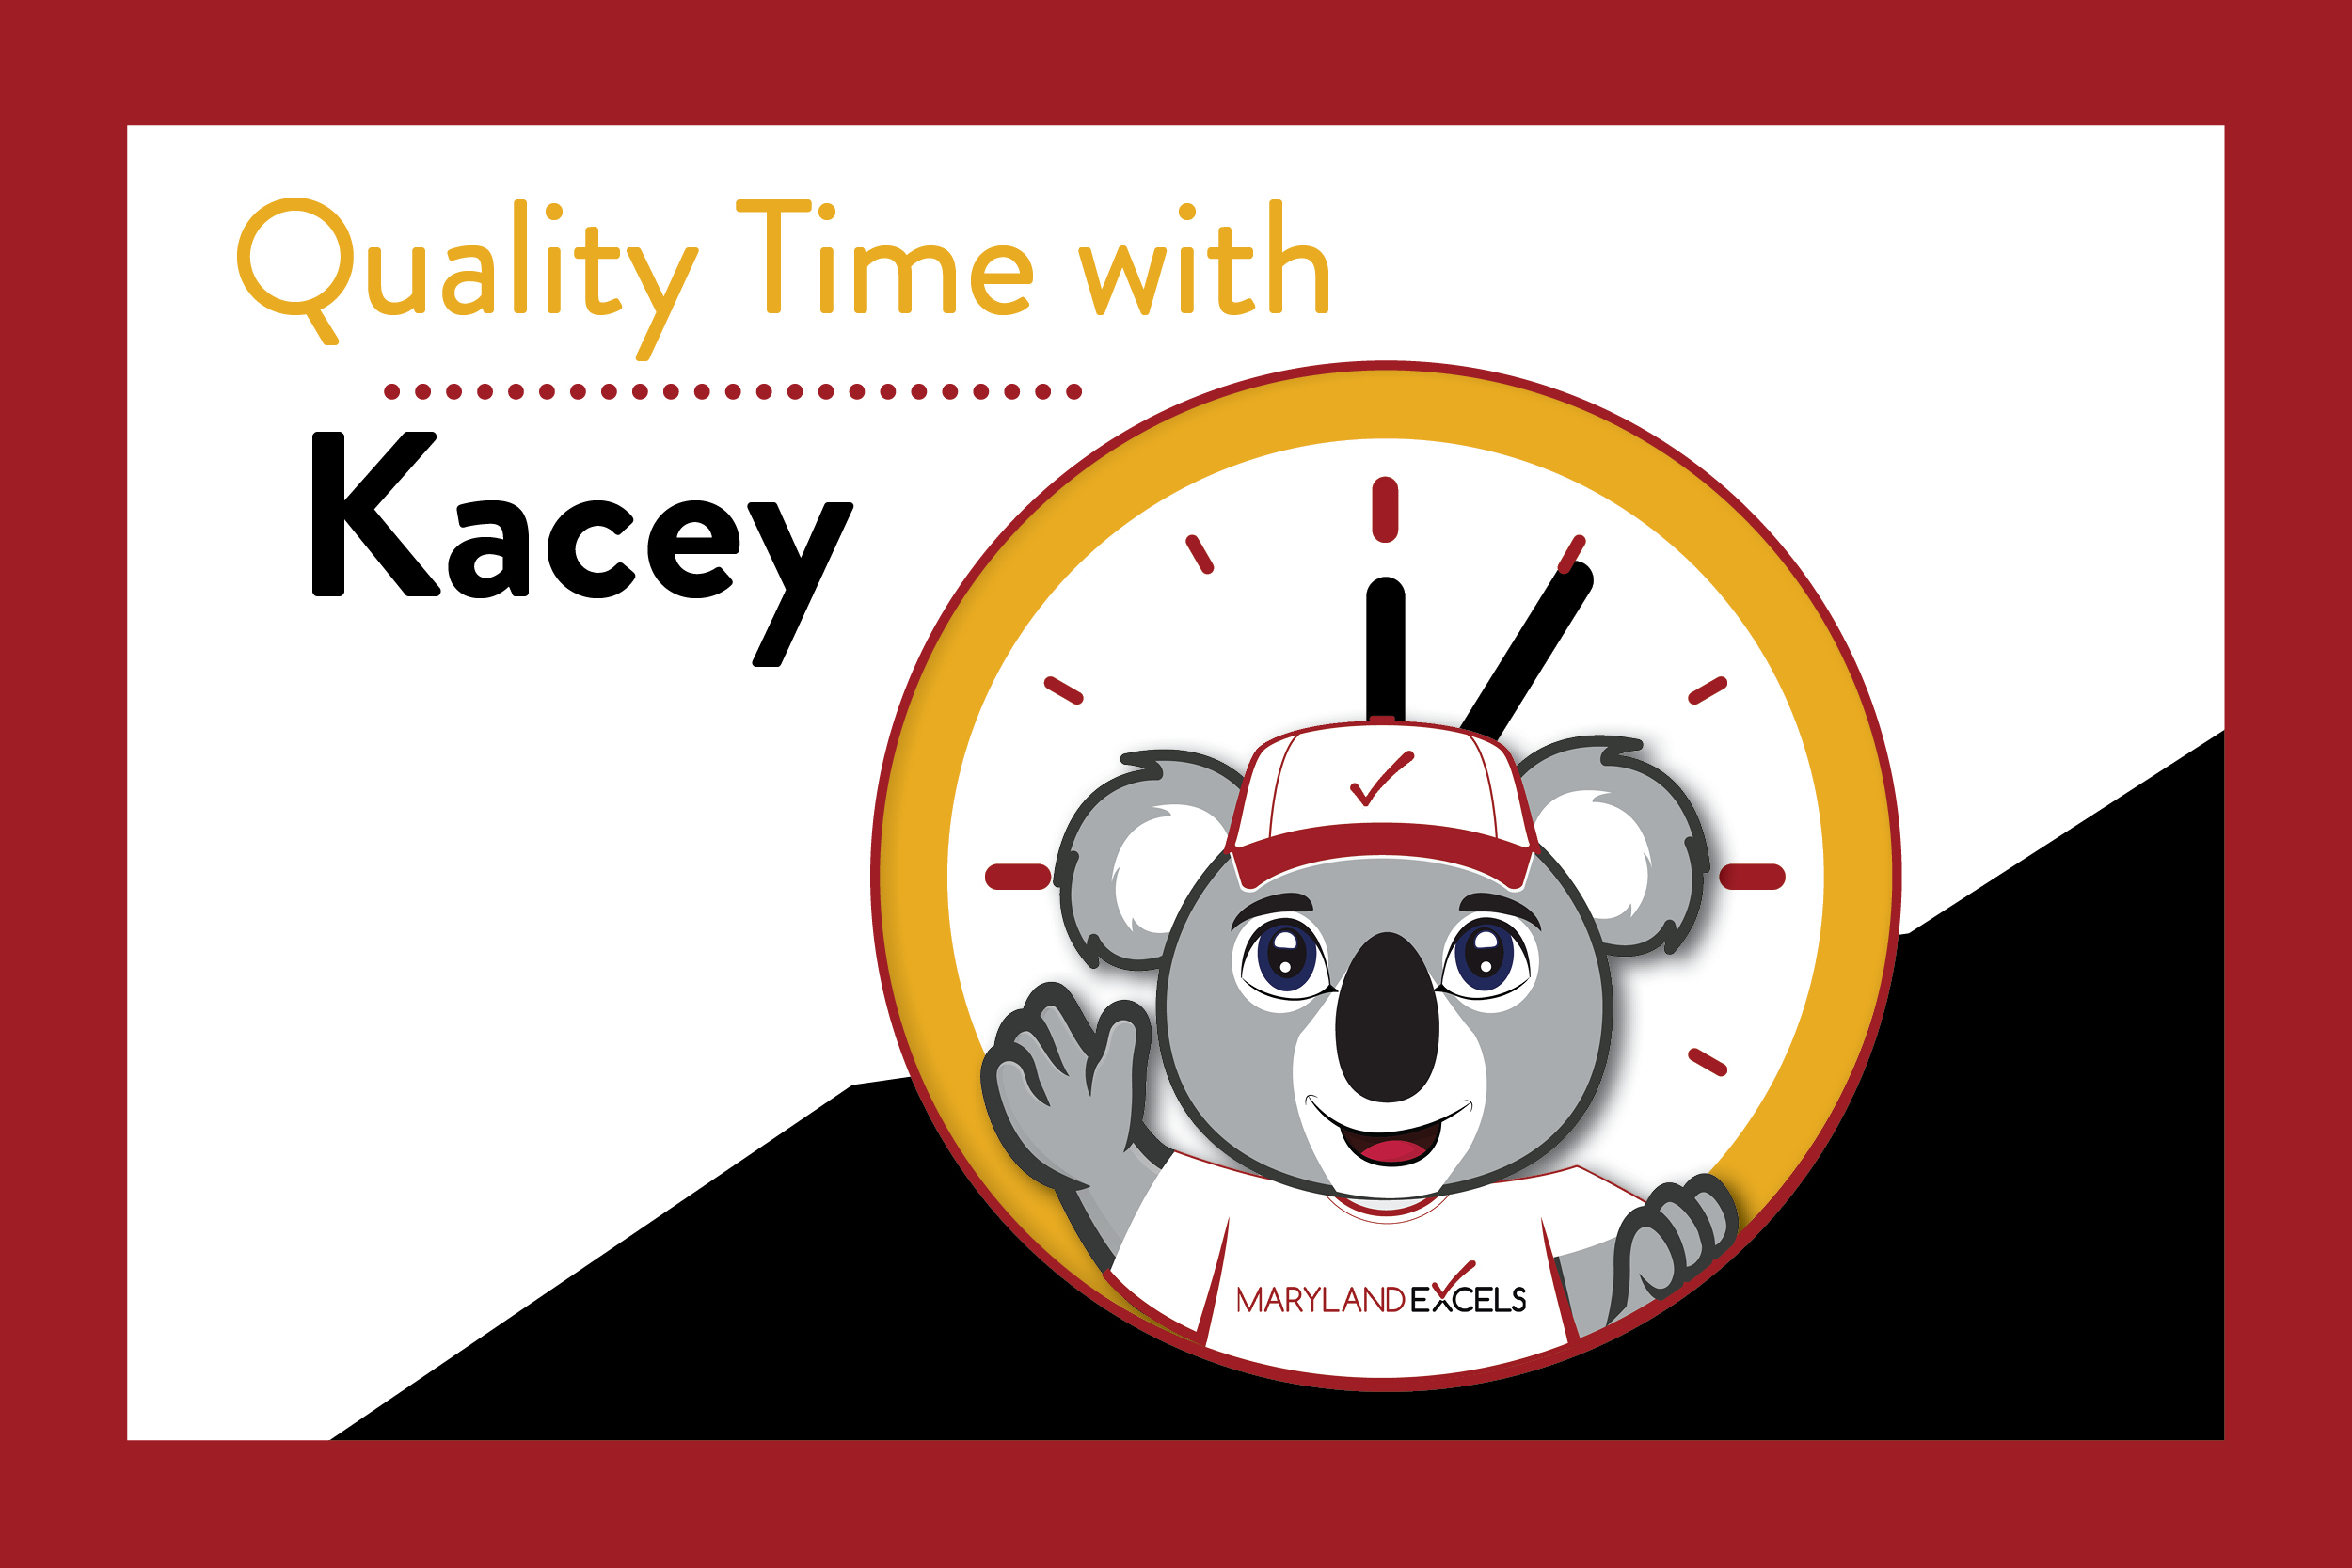 Quality Time with Kacey with a cartoon koala wearing a Maryland EXCELS T-shirt and sitting in front of a clock